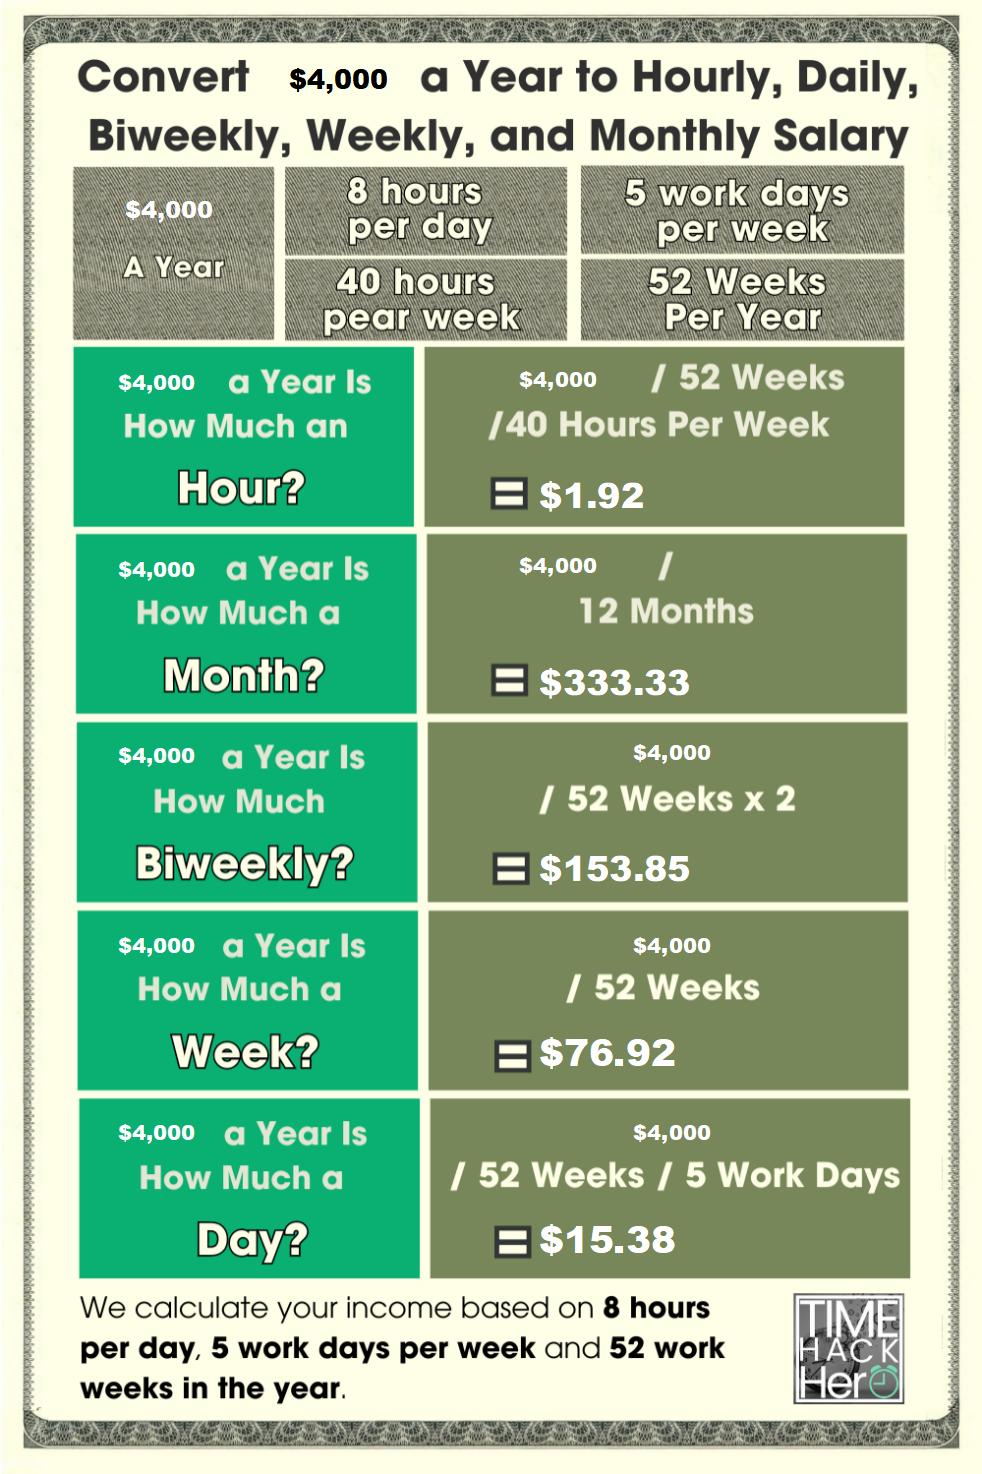 Convert $4000 a Year to Hourly, Daily, Biweekly, Weekly, and Monthly Salary